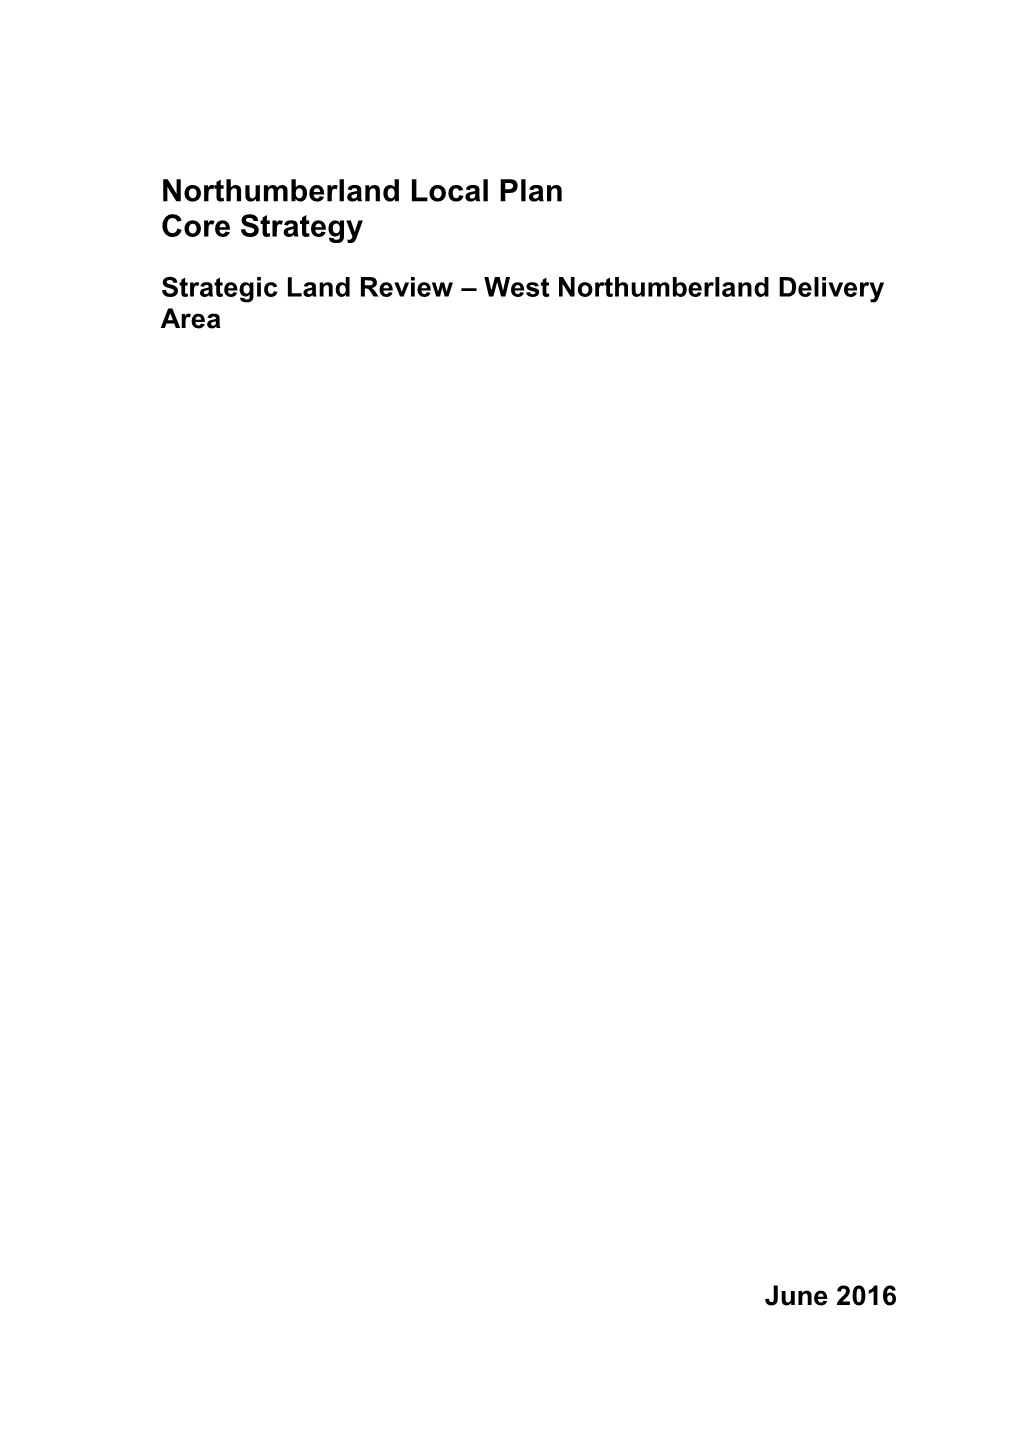 Northumberland Local Plan Core Strategy